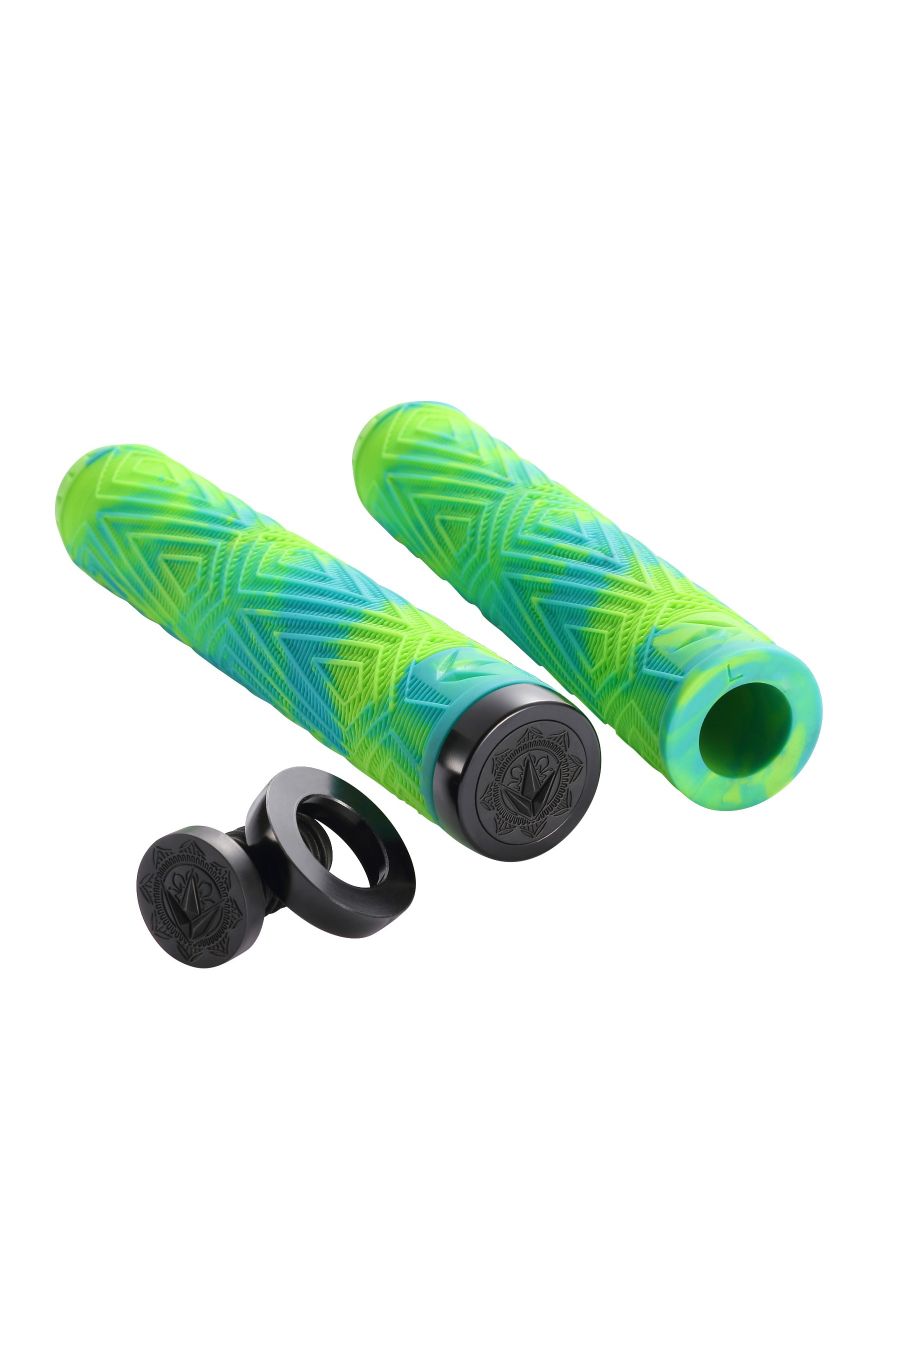 Envy Will Scott Grips Green Teal [col:green/teal]